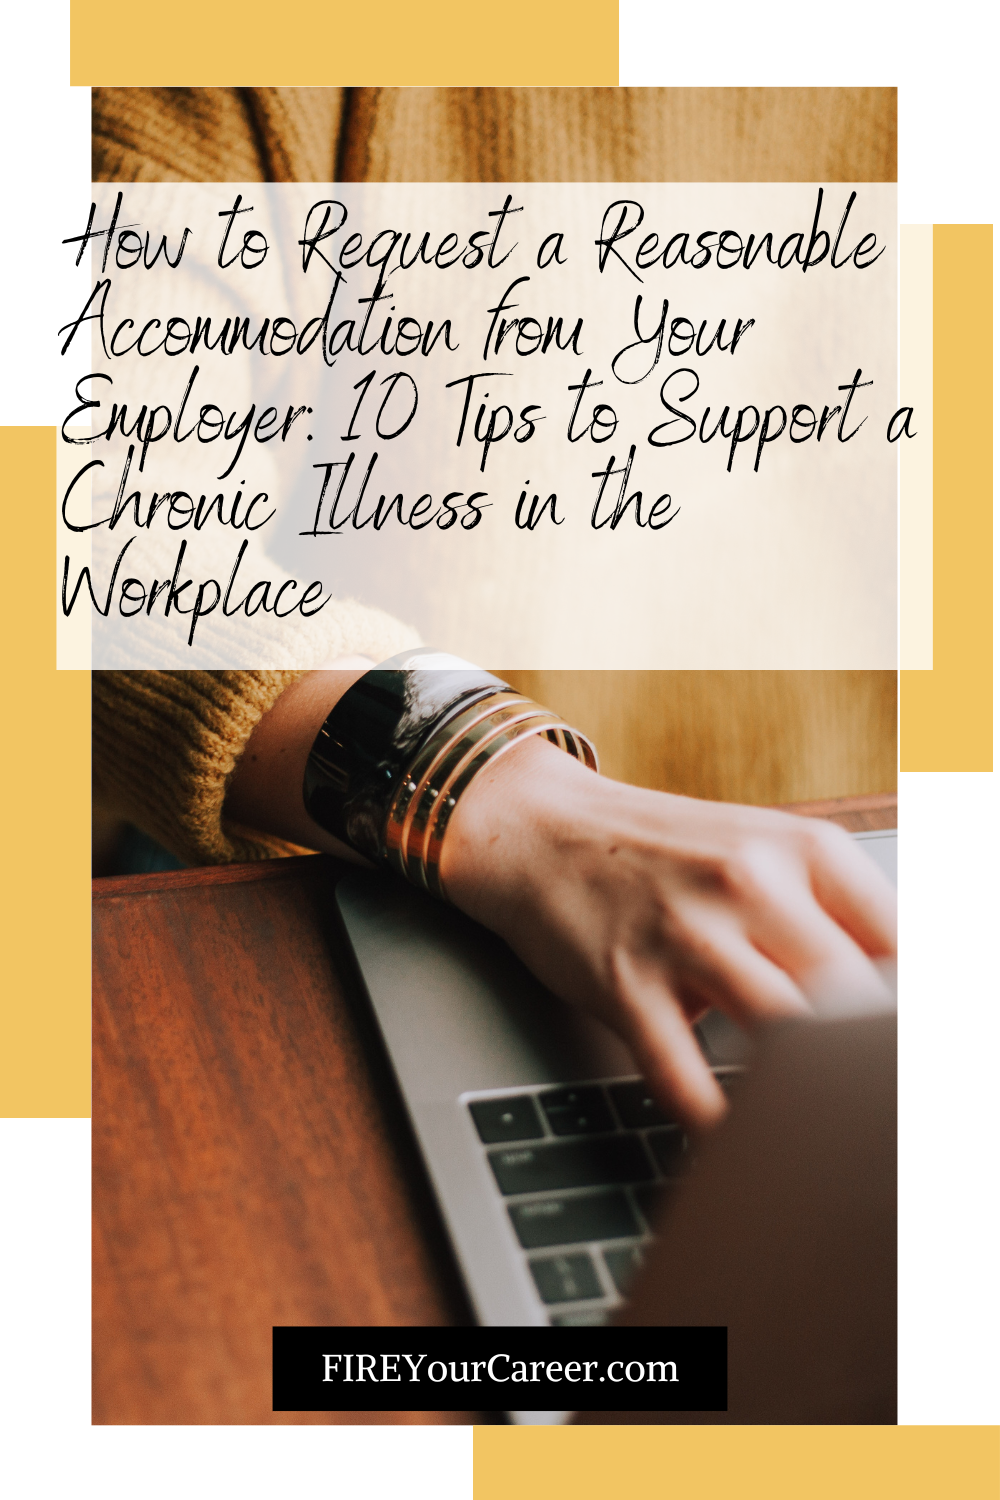 How to Request a Reasonable Accommodation from Your Employer 10 Tips to Support a Chronic Illness in the Workplace Pinterest